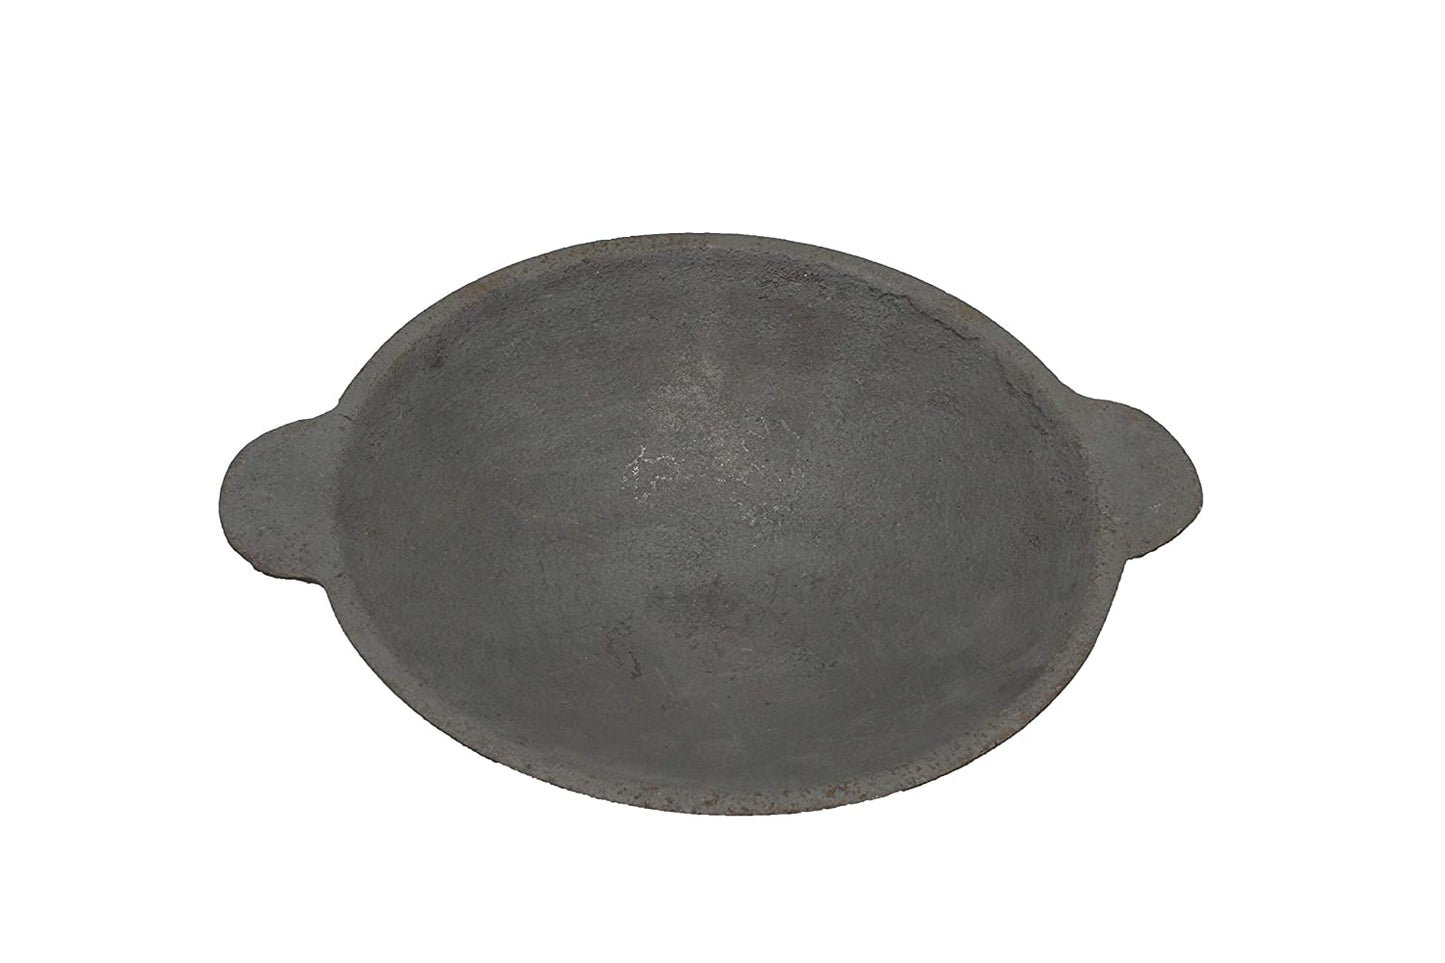 Pre-Seasoned Cast Iron Appam Pan 8 Inch | 20 cm | Depth-4 cm (with Lid) (Induction Compatible)